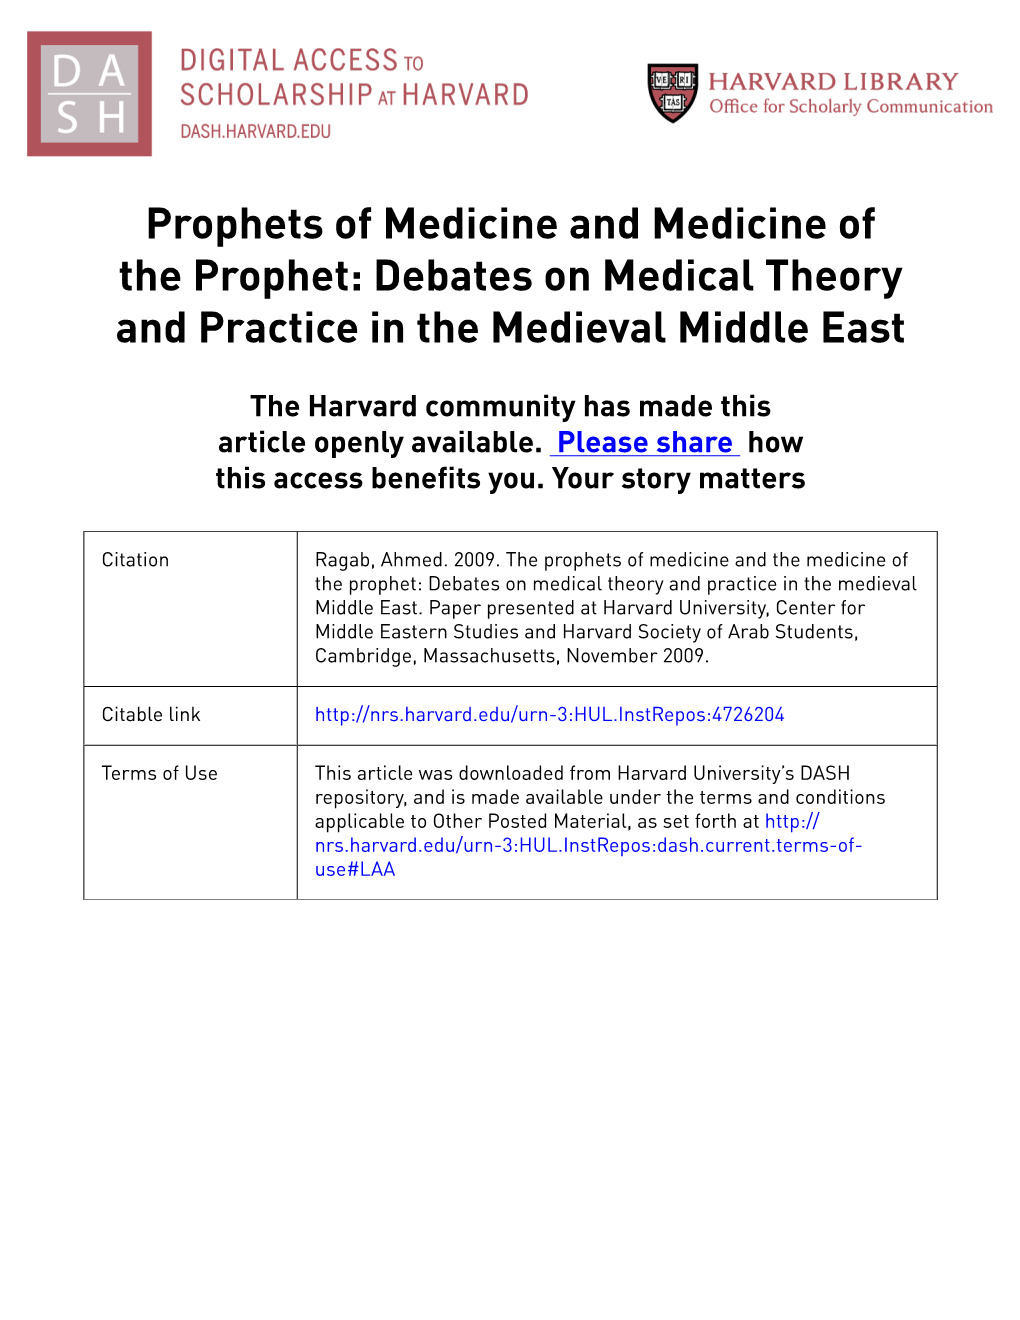 Prophets of Medicine and Medicine of the Prophet: Debates on Medical Theory and Practice in the Medieval Middle East